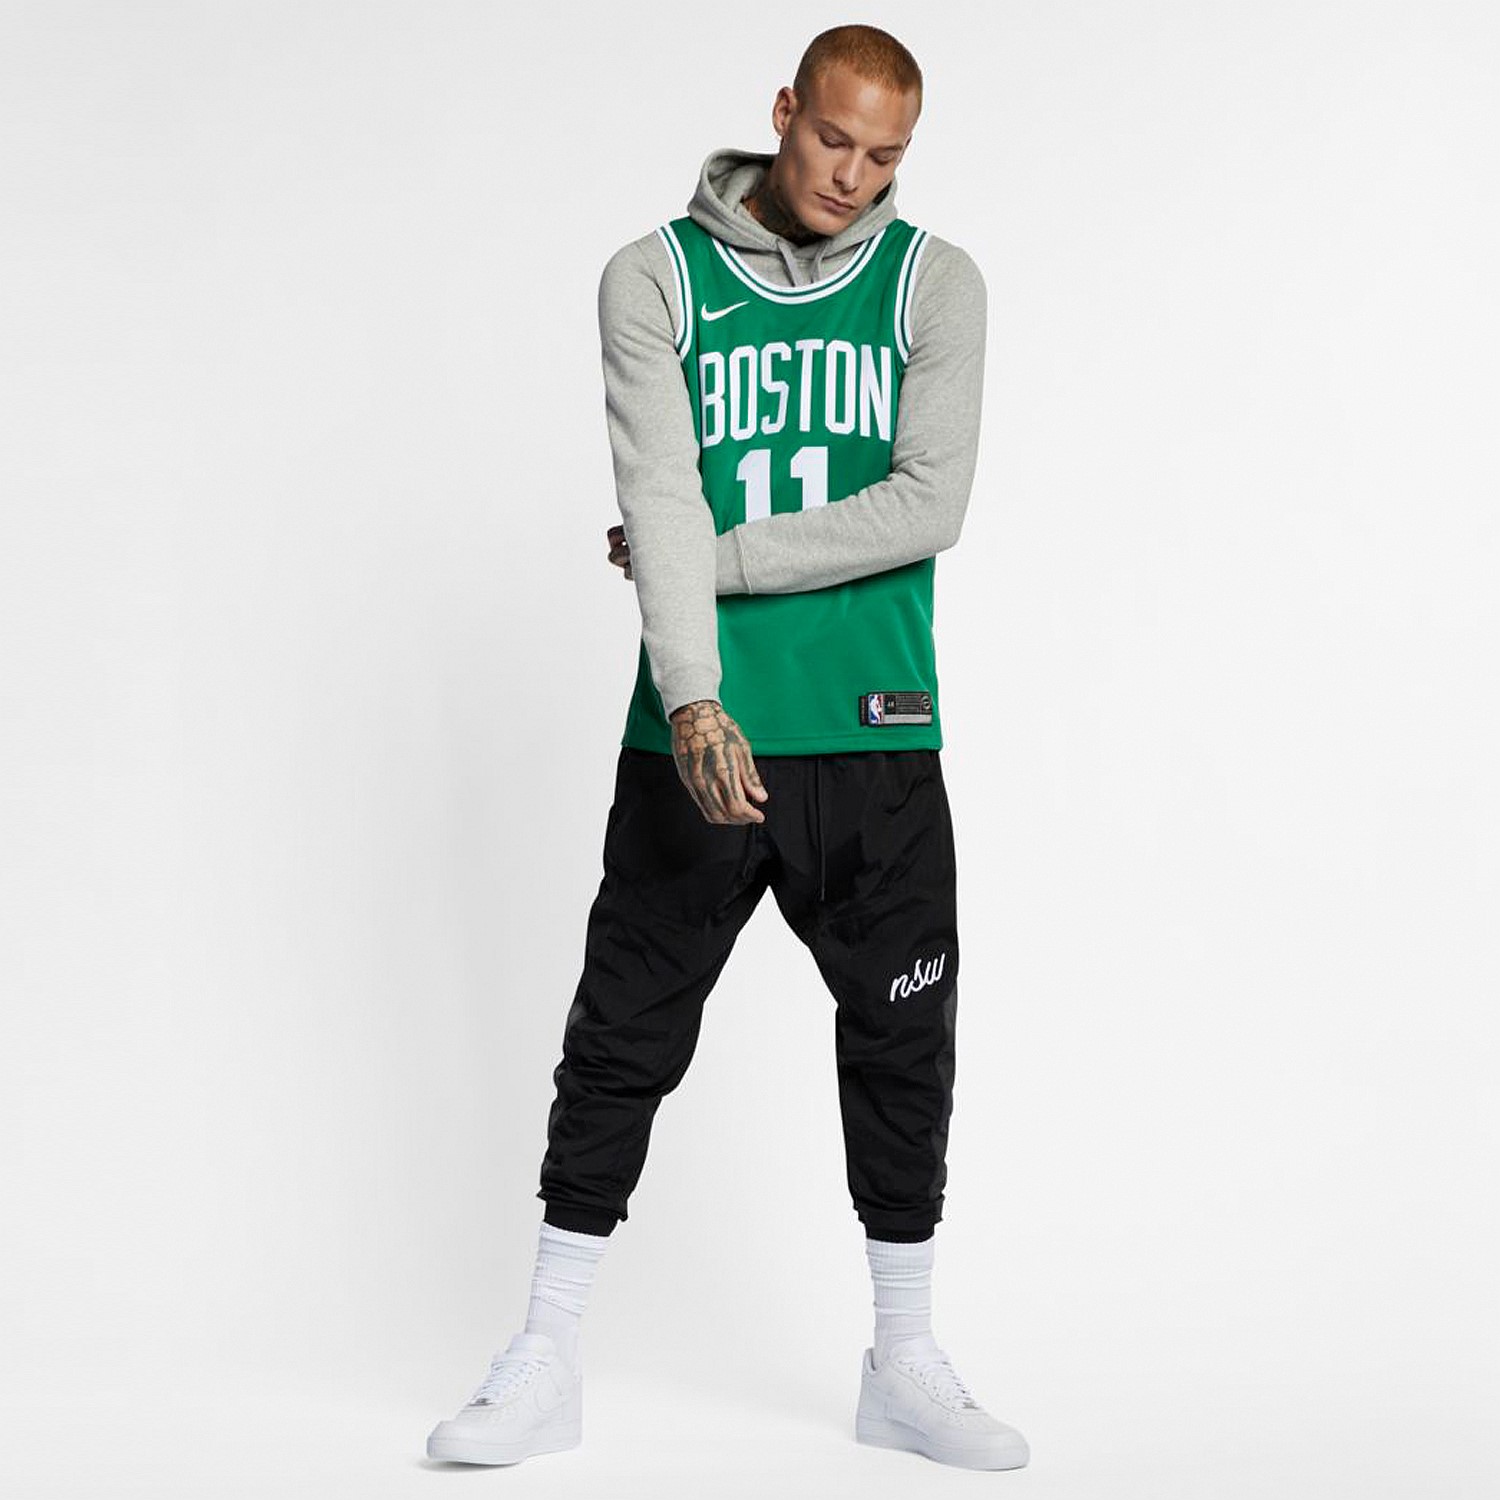 hoodie and nba jersey